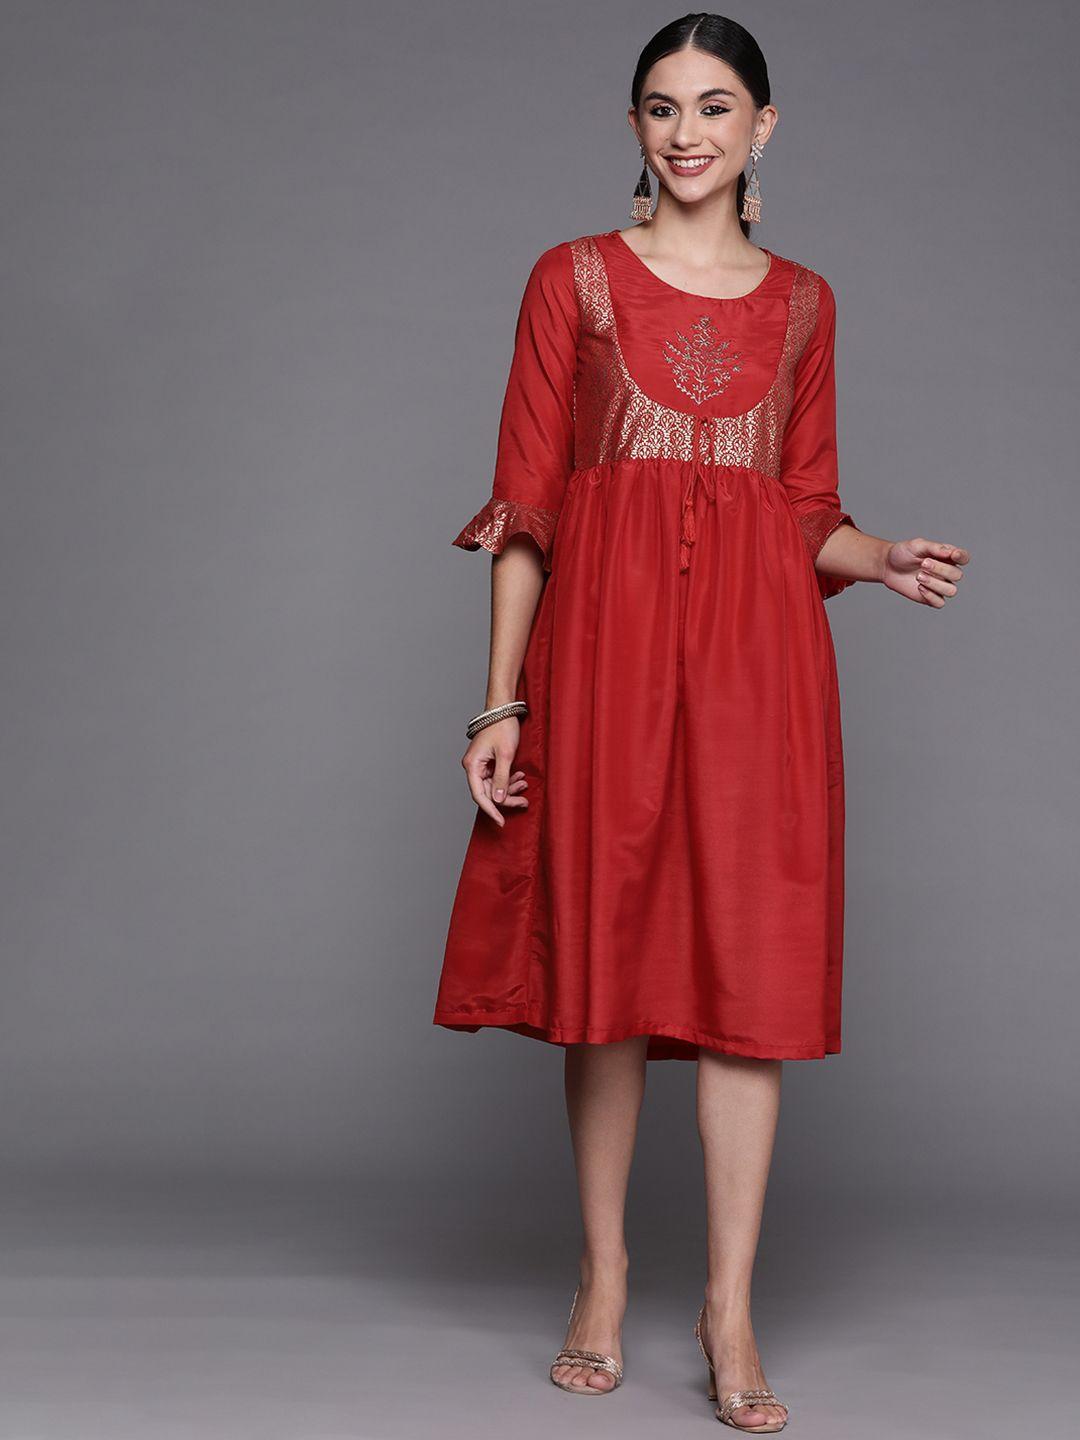 biba red & golden ethnic motifs printed embroidered detail a-line midi dress